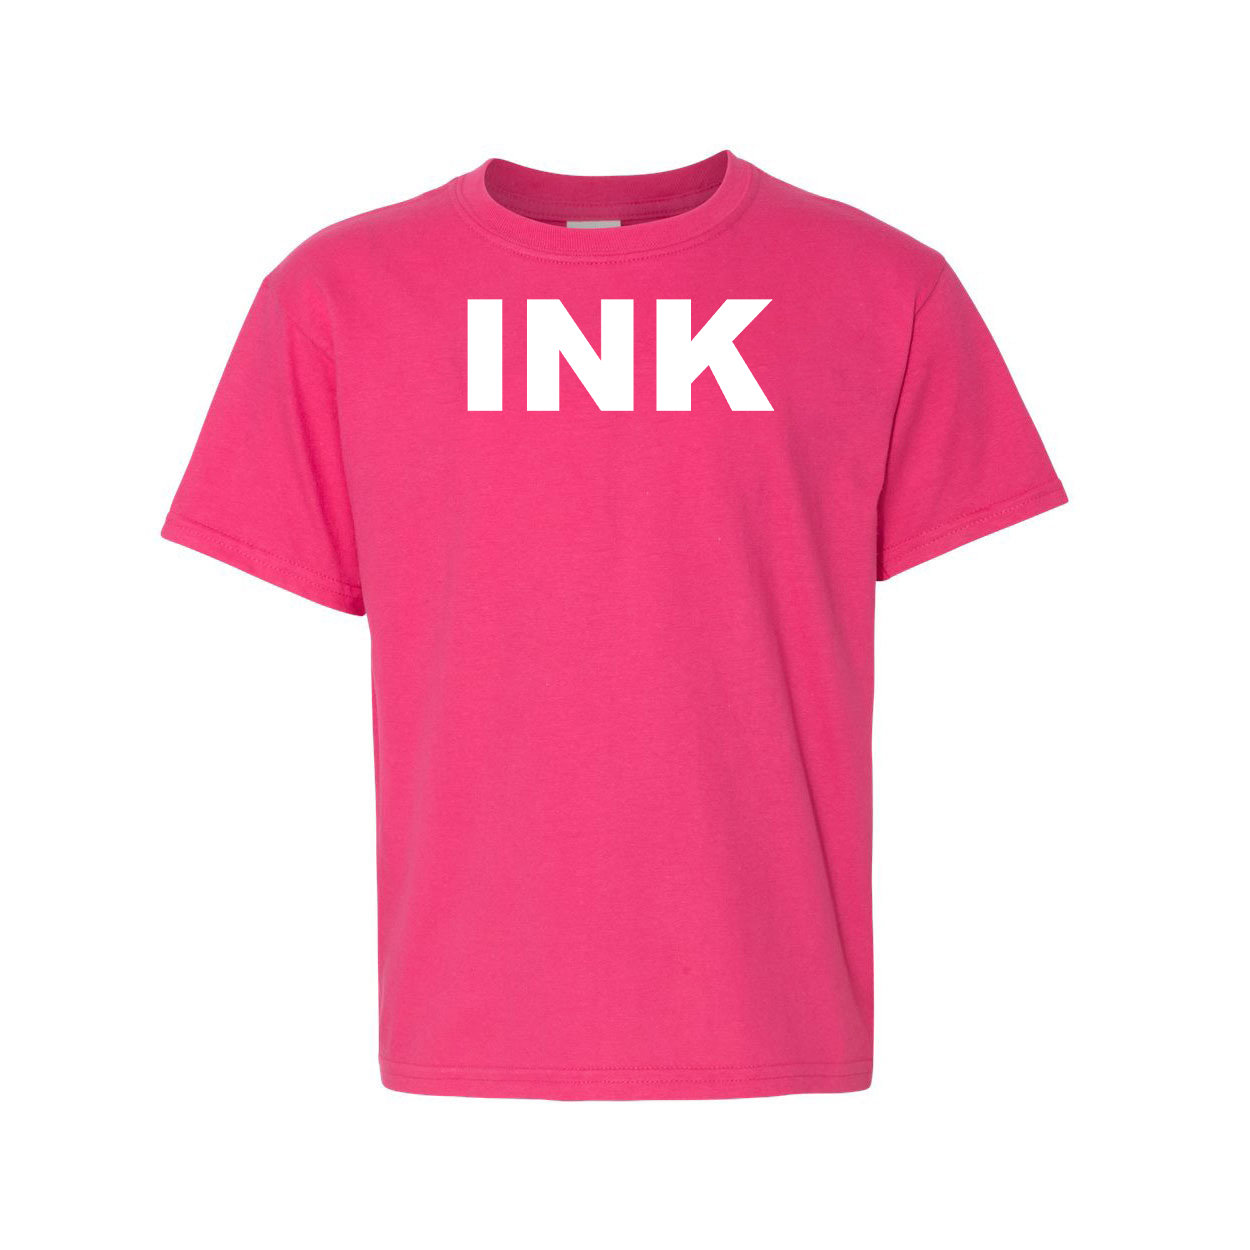 Ink Brand Logo Classic Youth T-Shirt Pink 